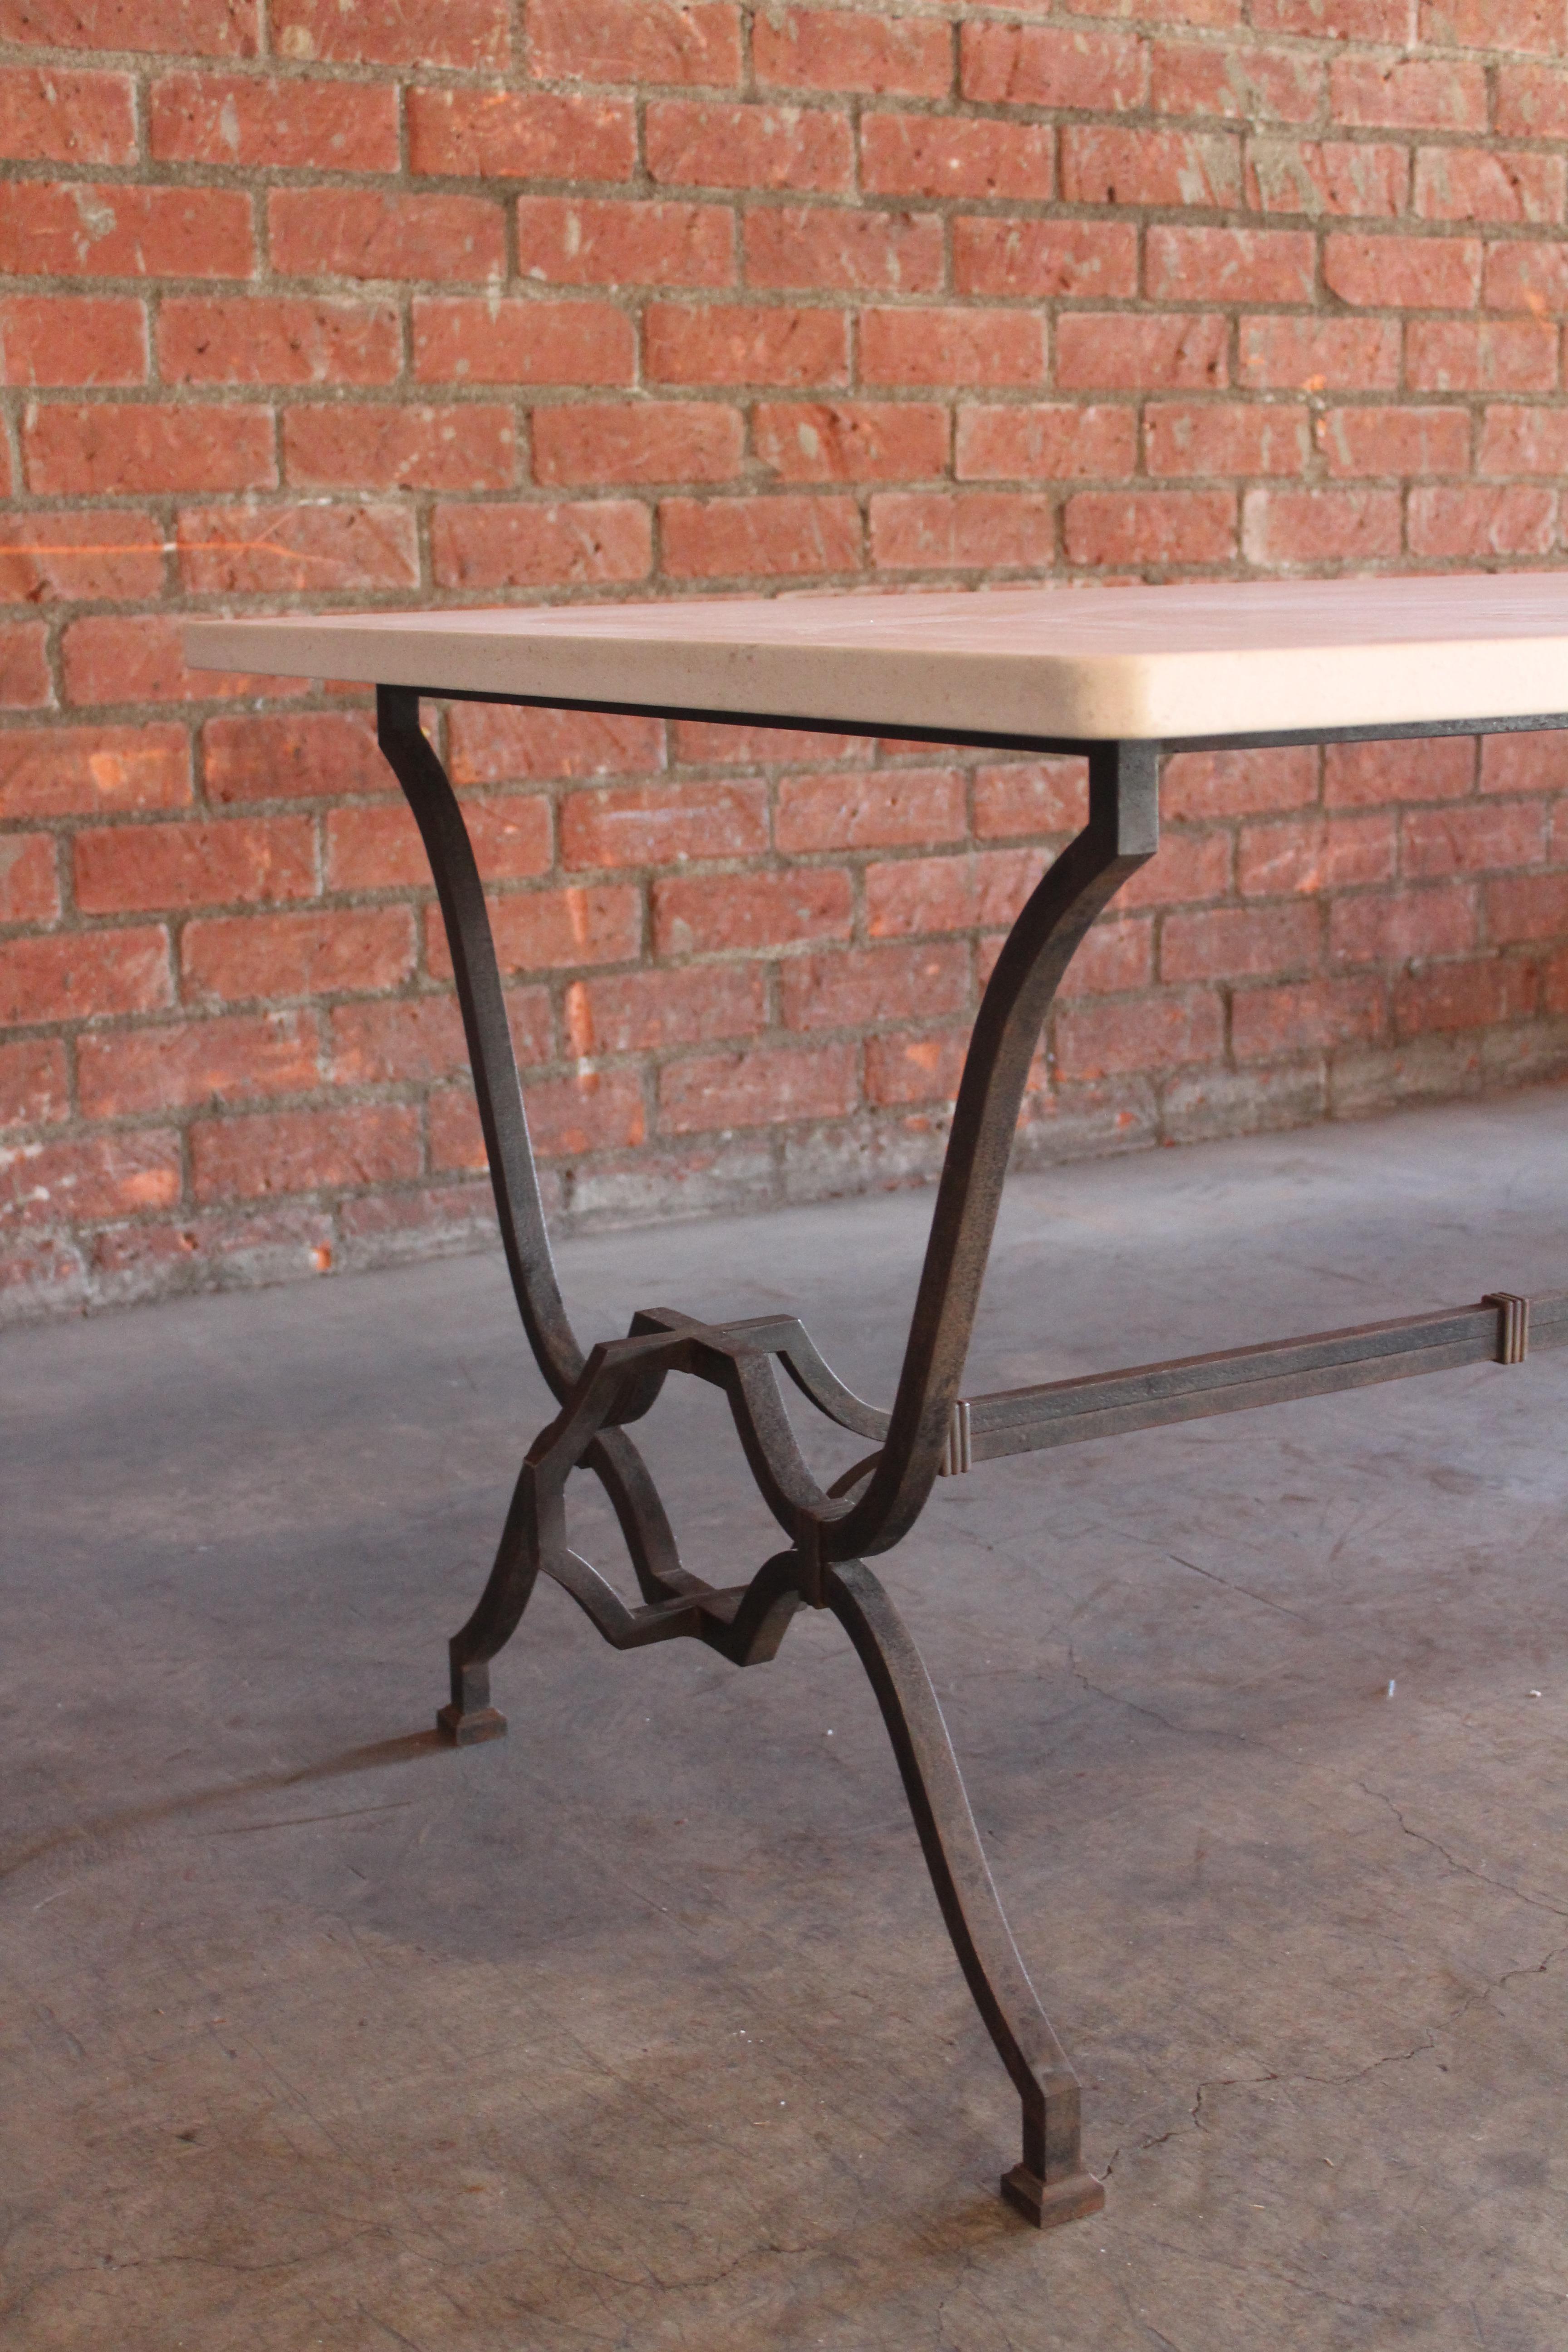 1940s French Wrought Iron and Limestone Table by Colette Gueden for René Prou For Sale 7